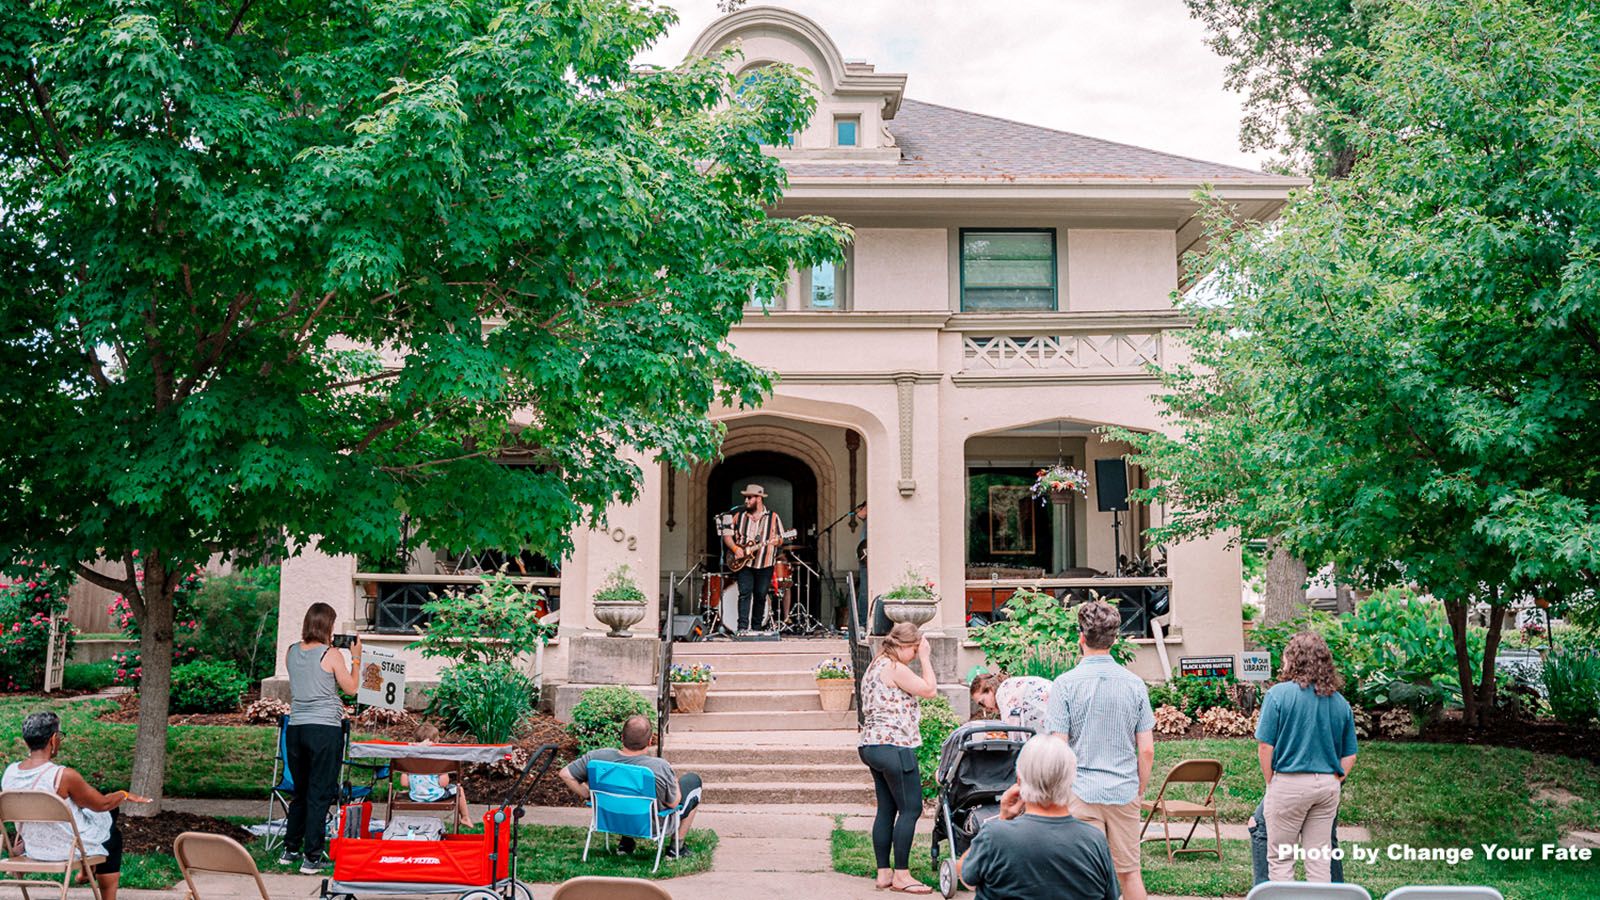 Homes in the Williams Woodland Park Neighborhood will be converted into stages on June 3 for PorchFest.